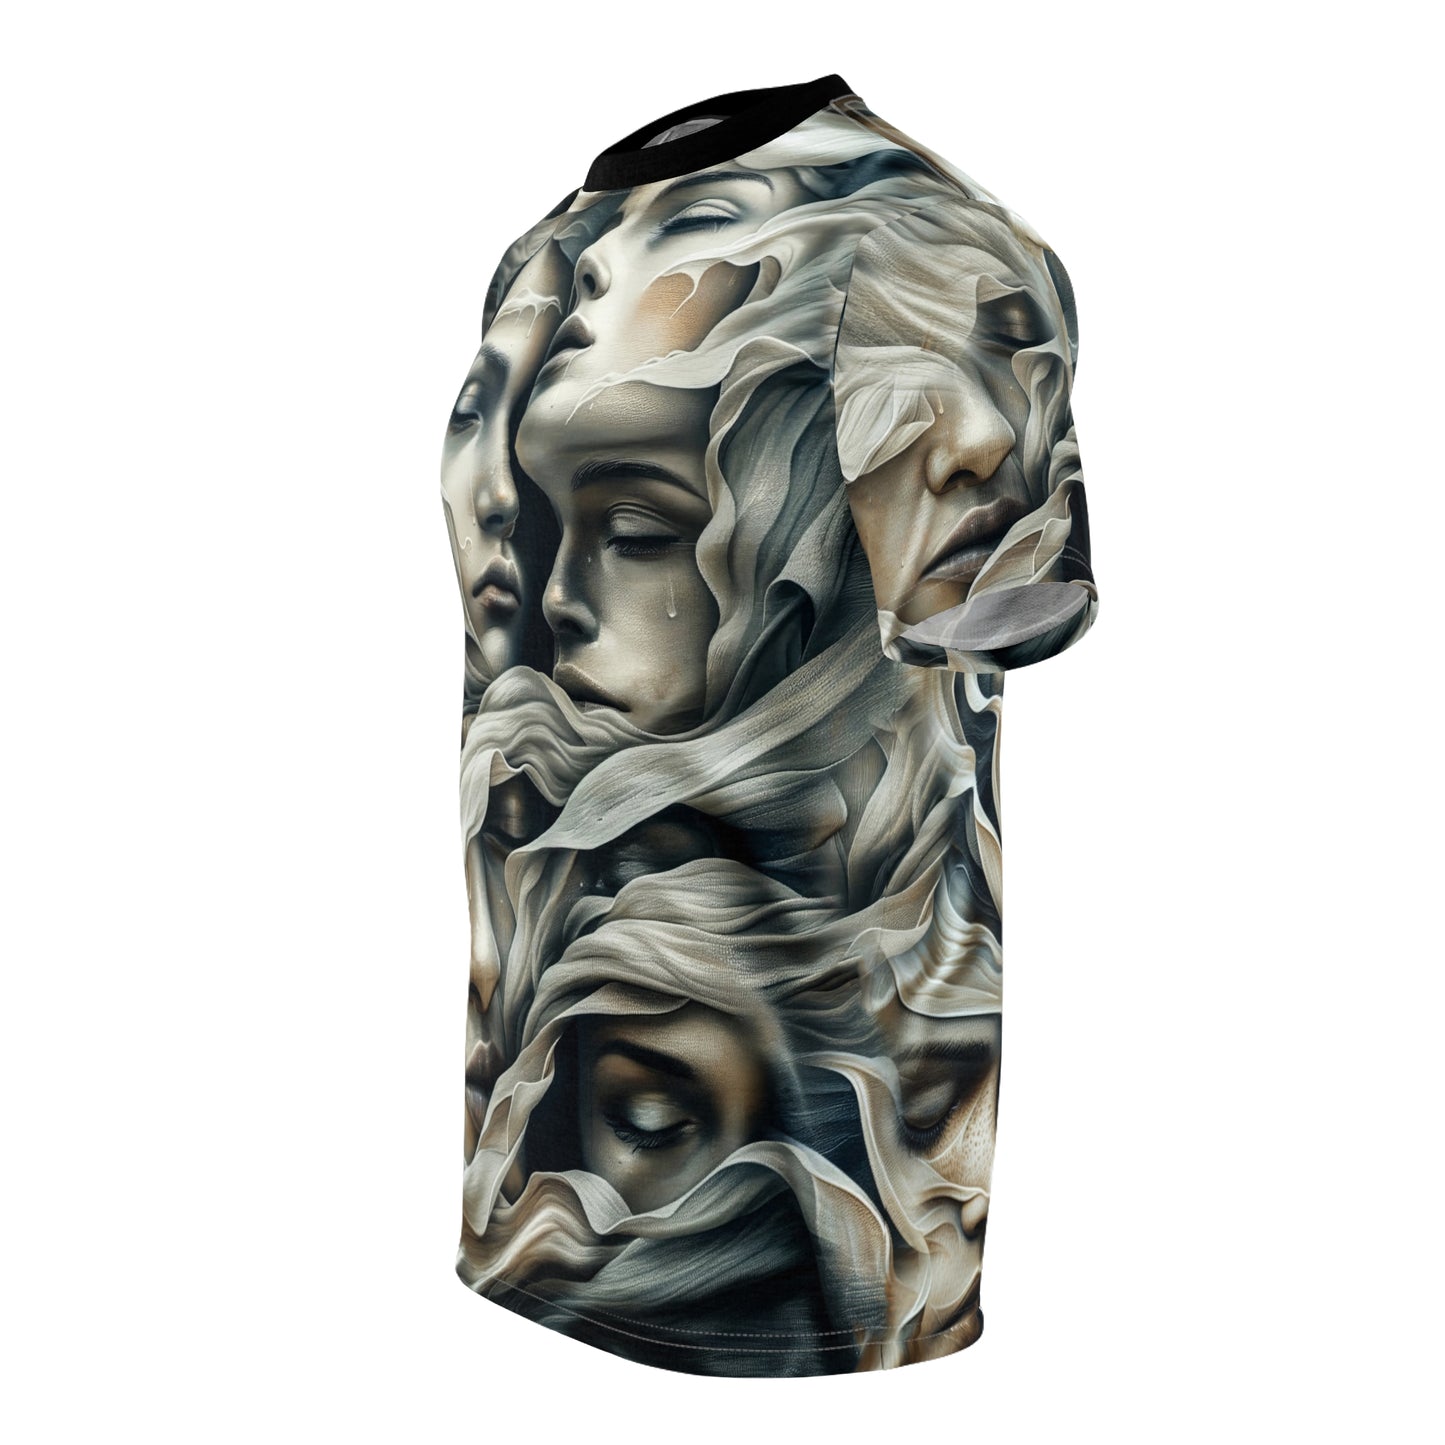 Ethereal Faces T-Shirt (AOP)